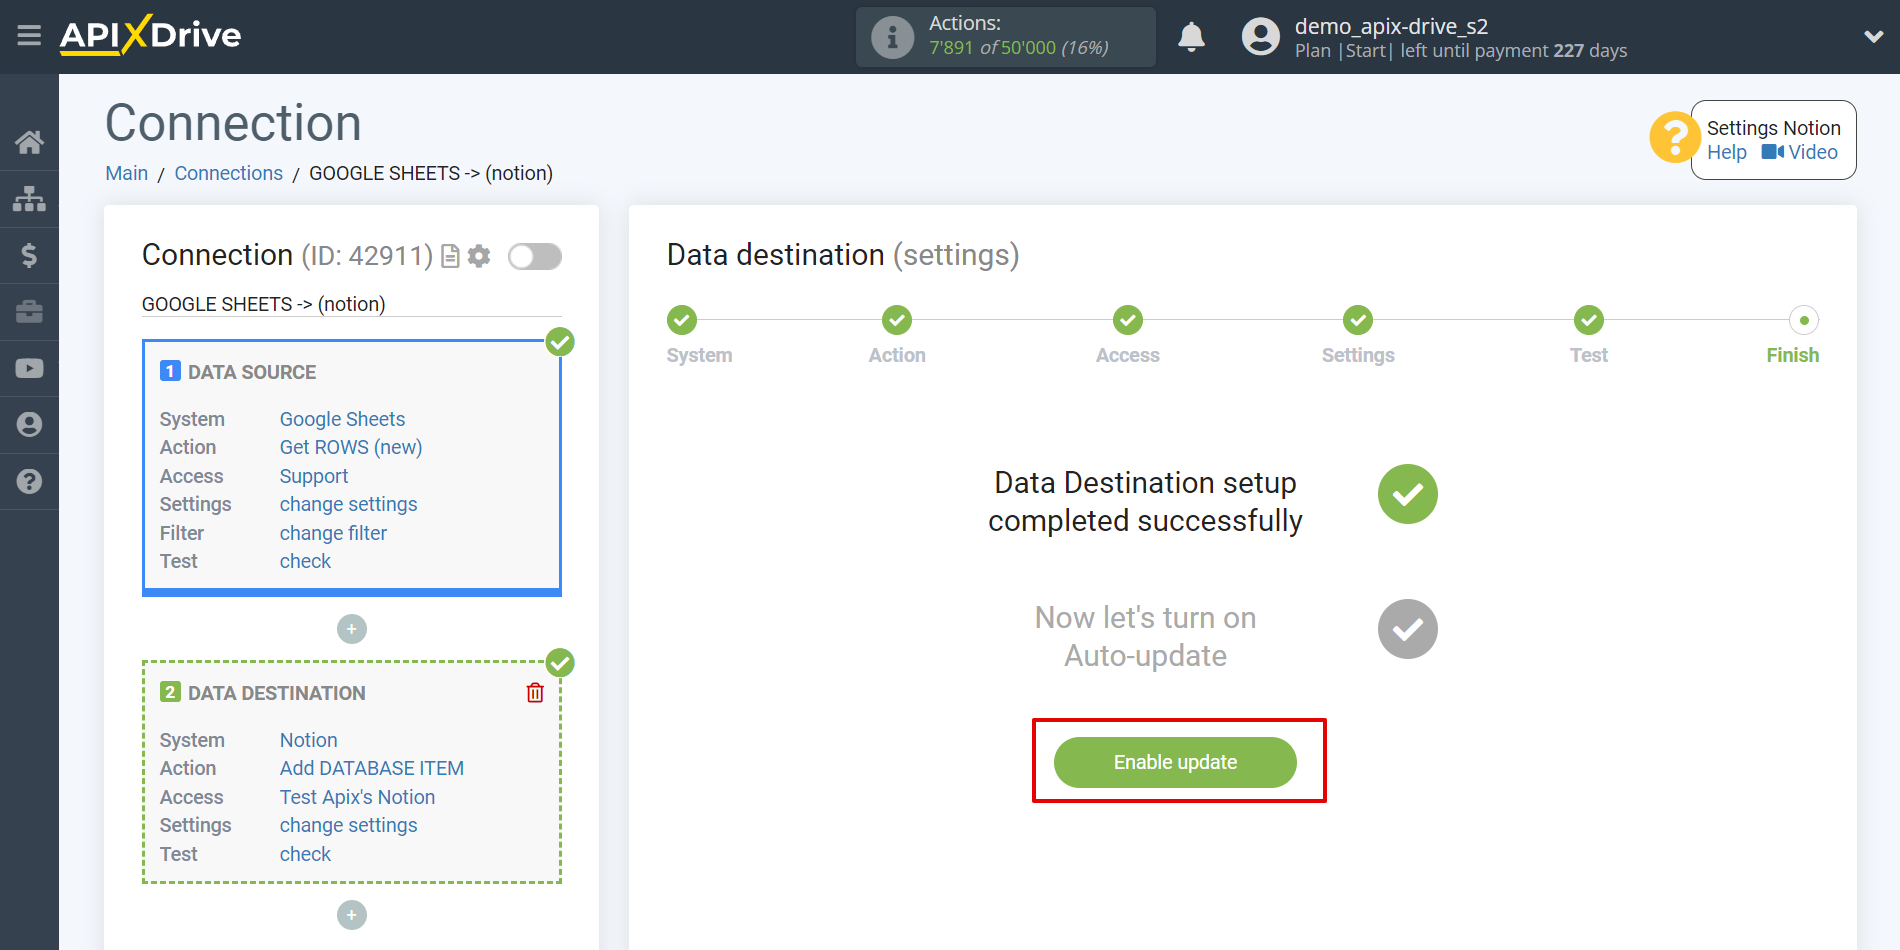 How to Connect Notion as Data Destination | Enable auto-update